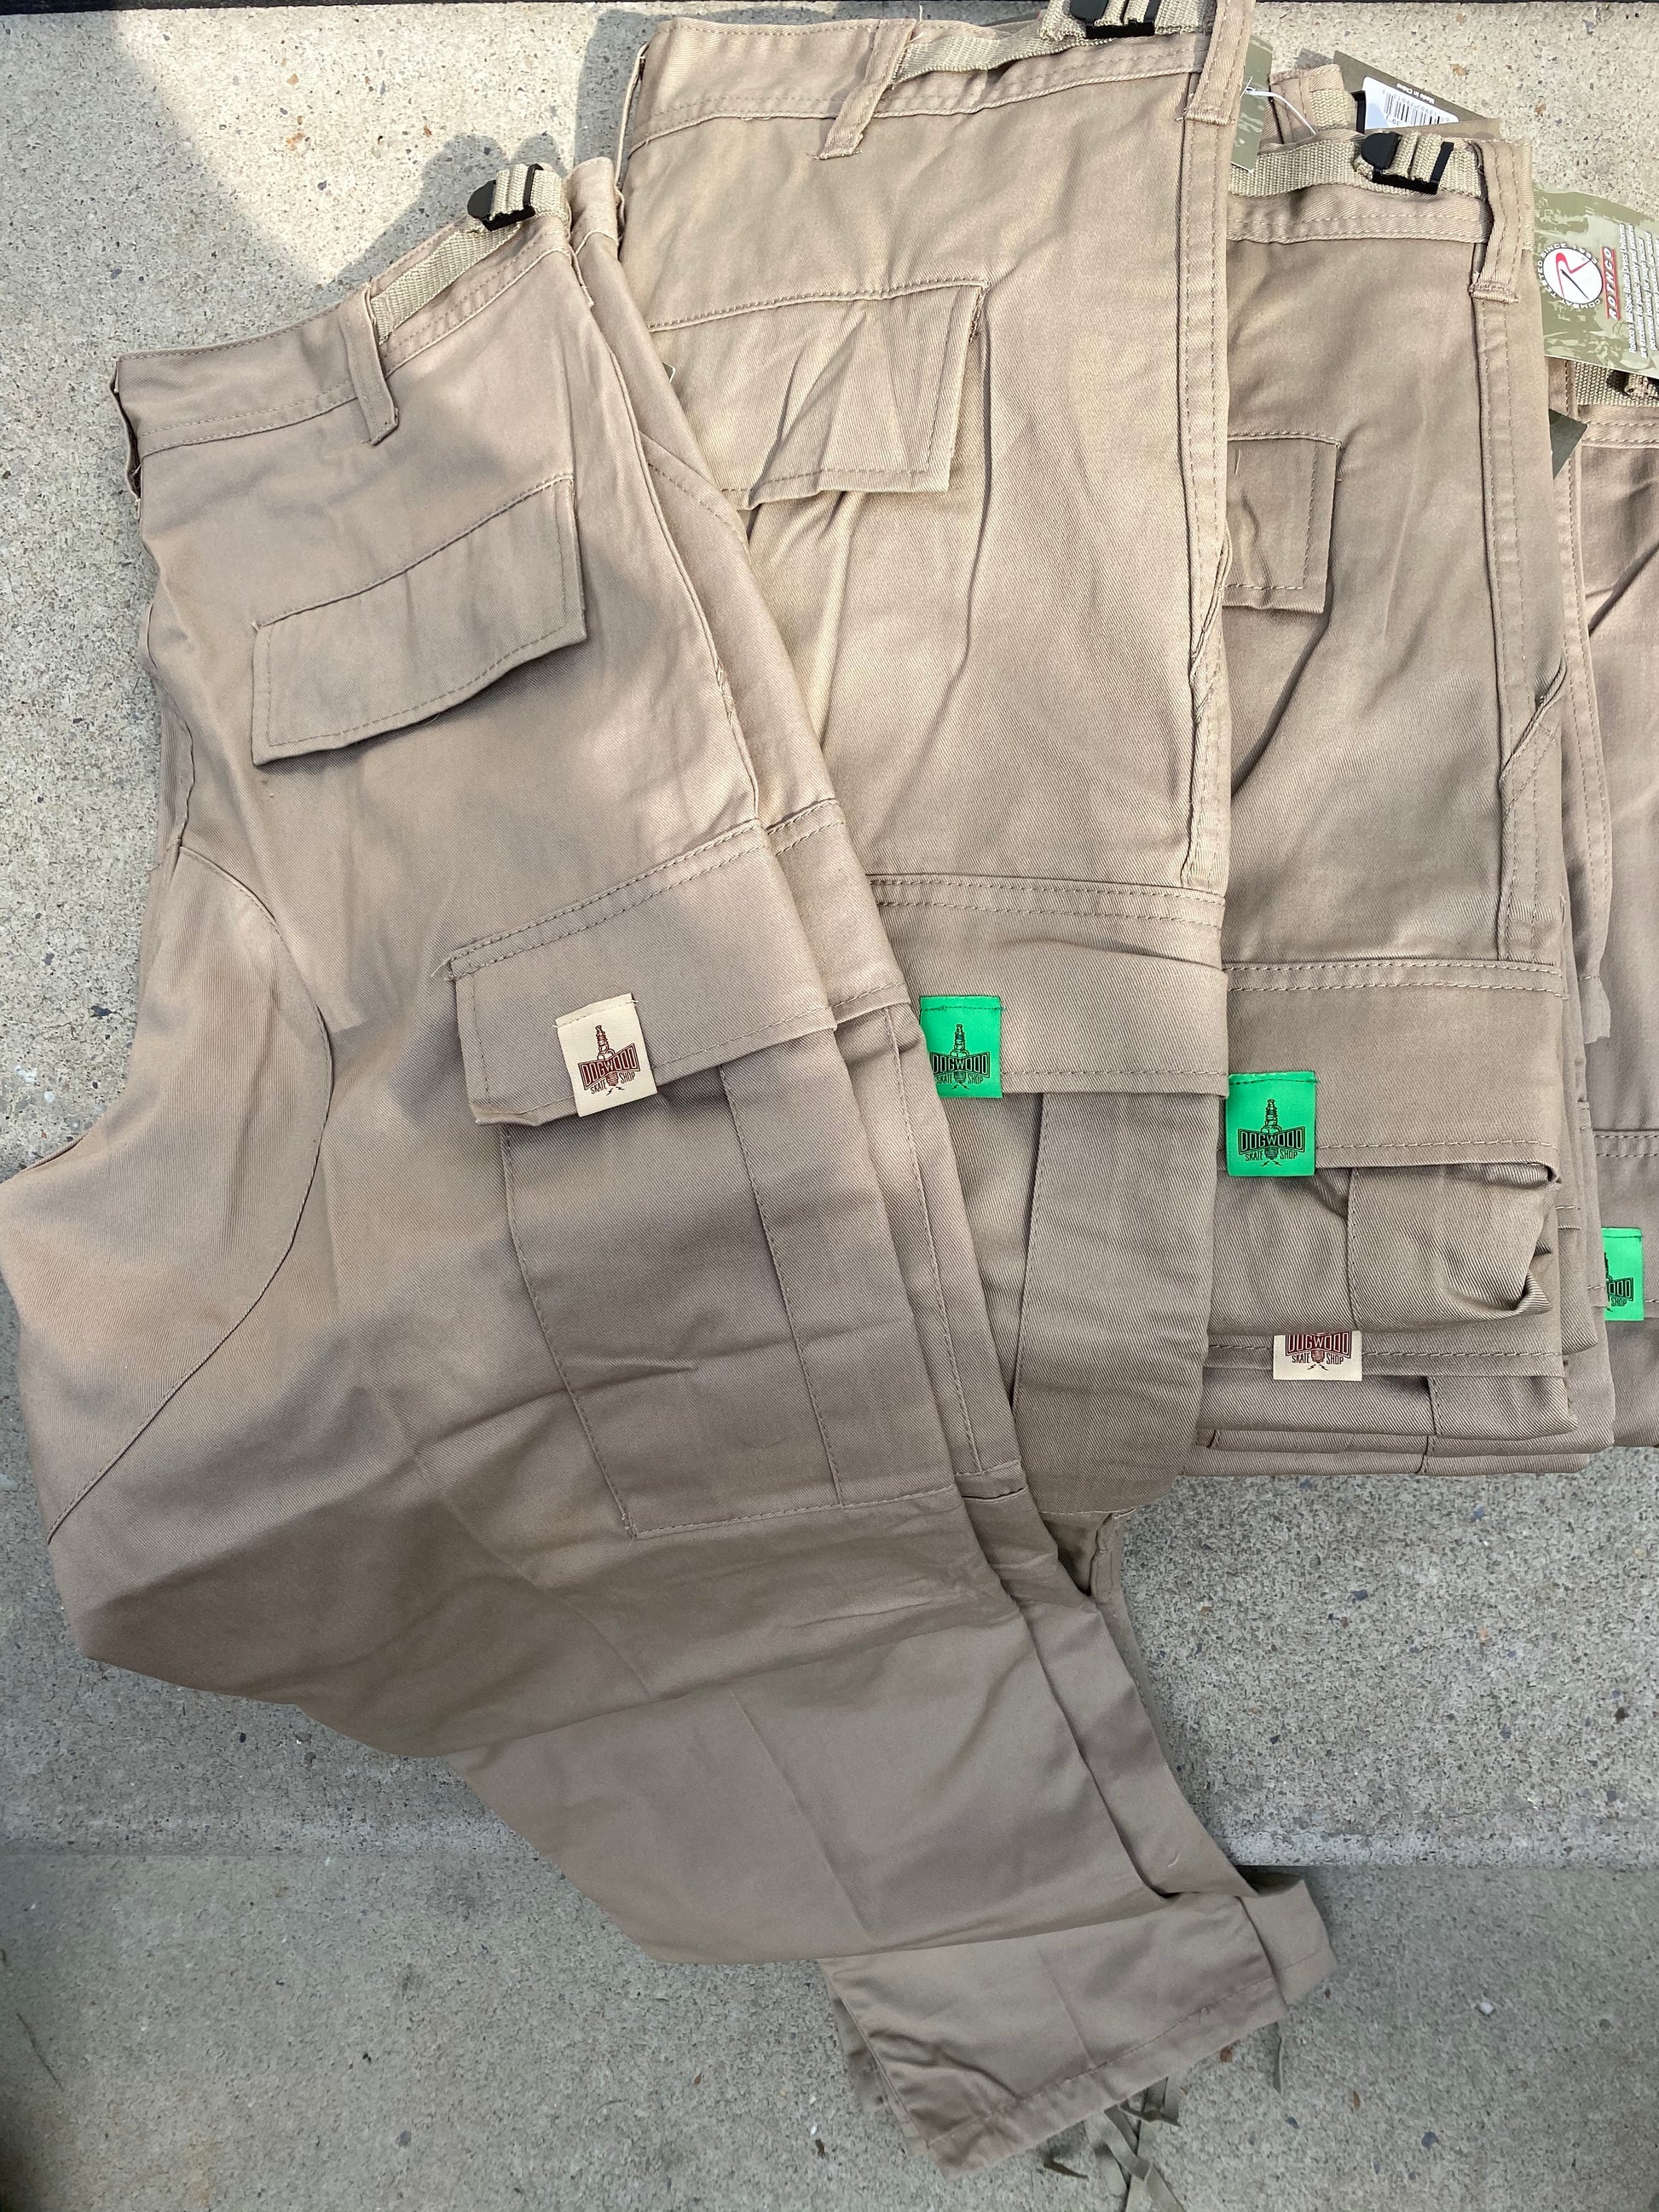 Plug BDU Cargo Pants Grey Assorted Tags (size options listed